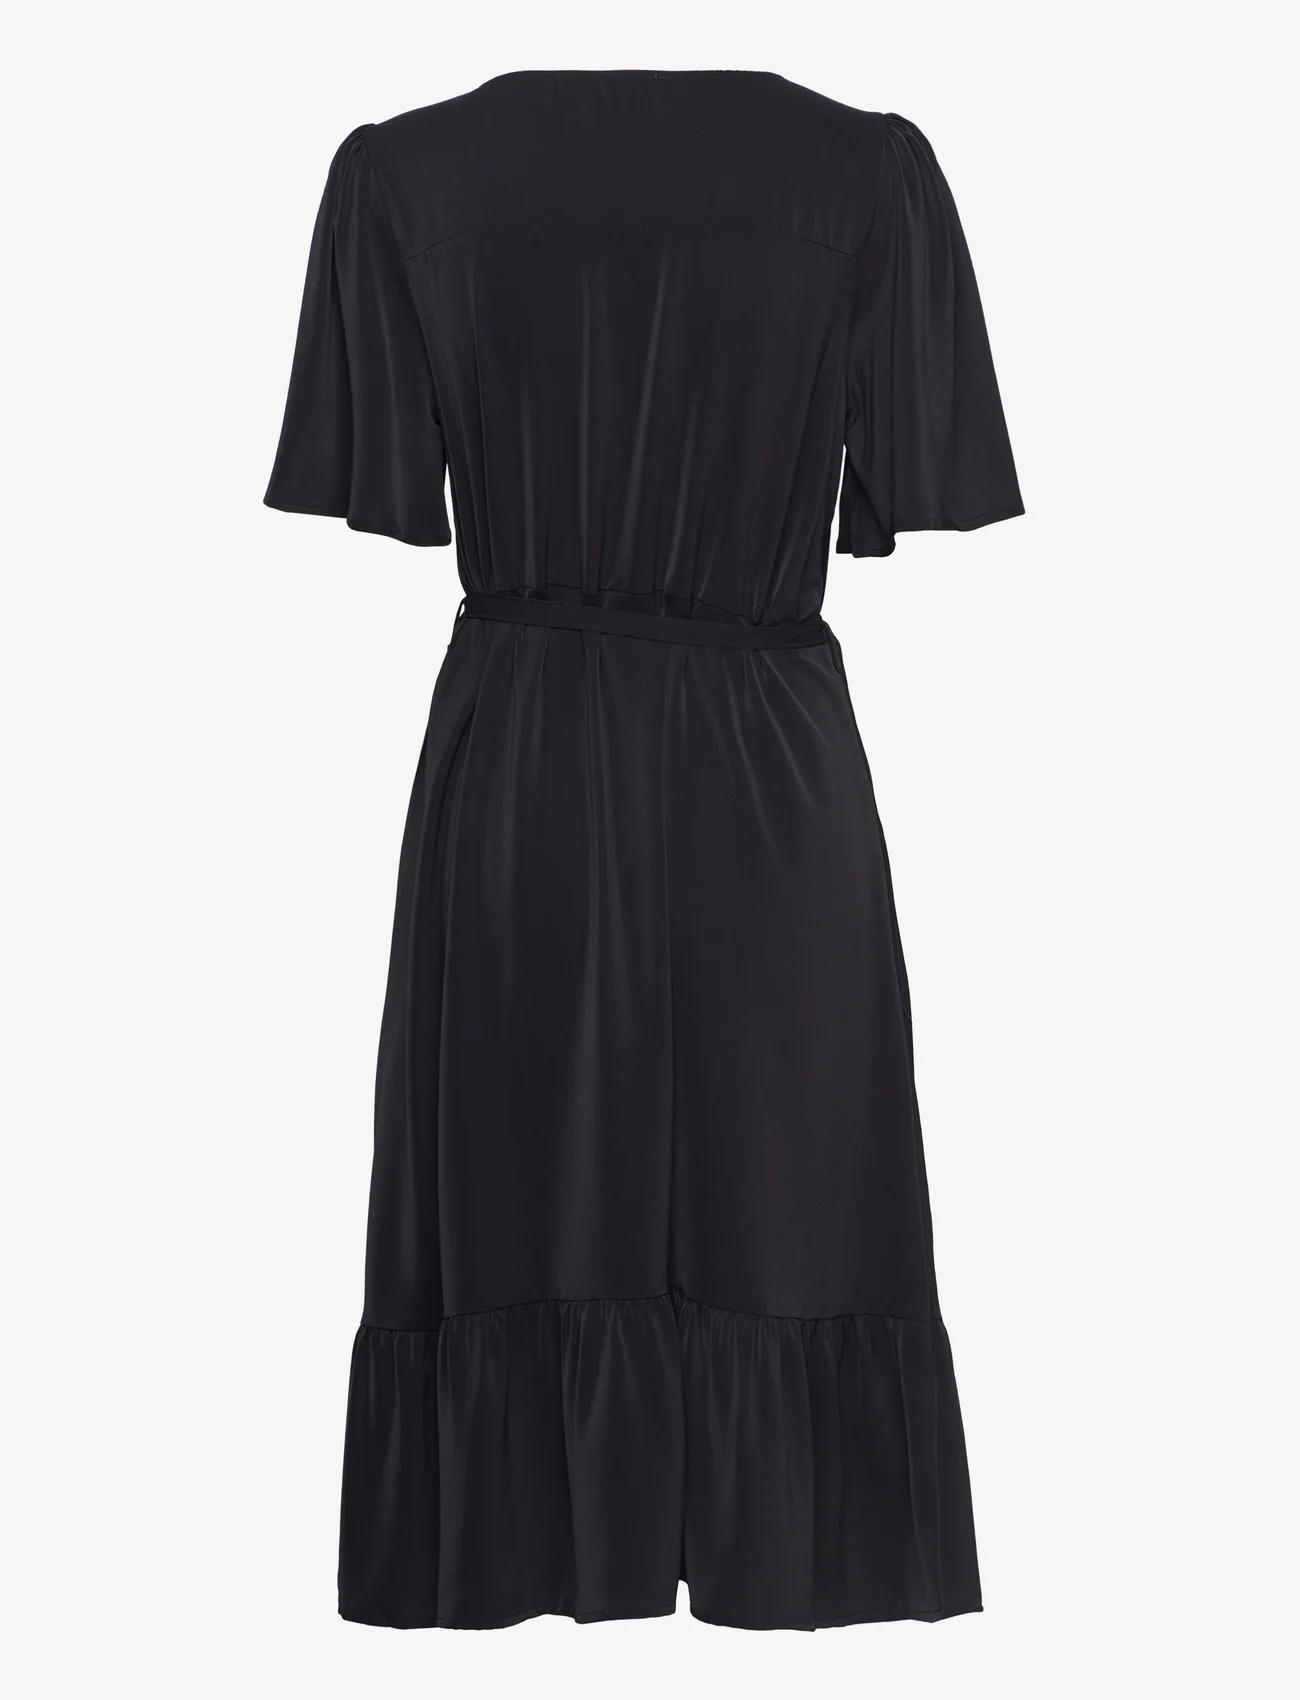 French Connection - HENLEY ANGEL M - shirt dresses - black - 1